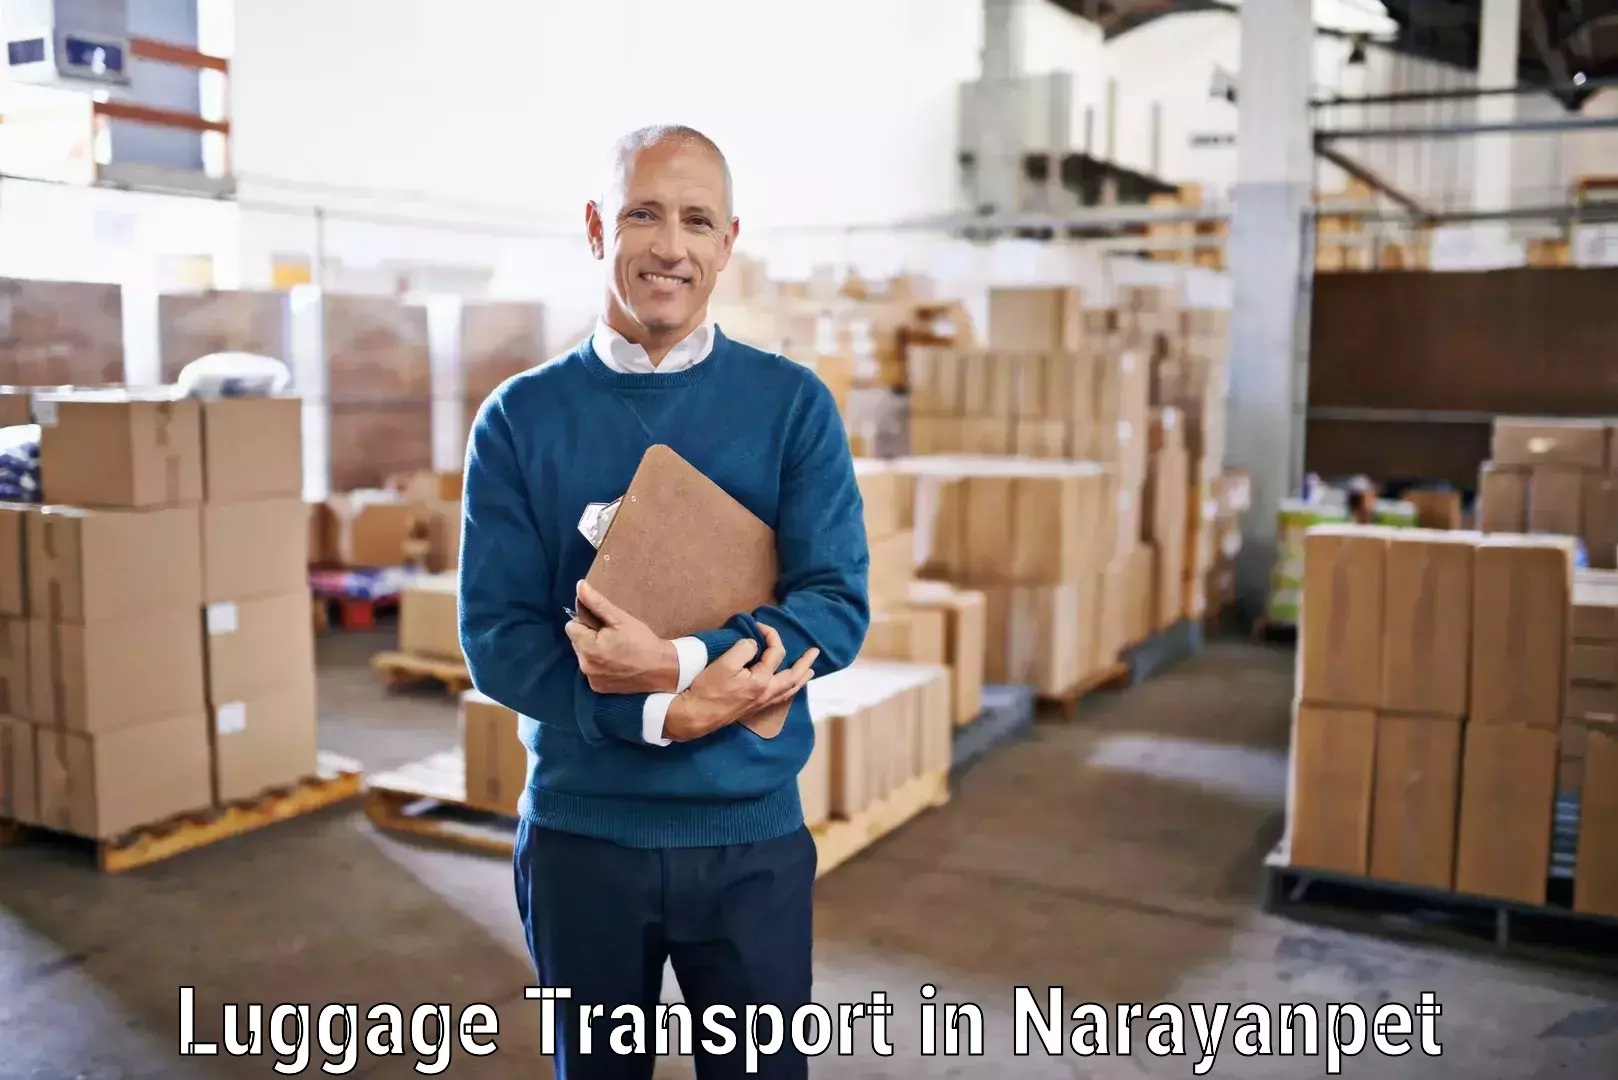 Hassle-free luggage shipping in Narayanpet